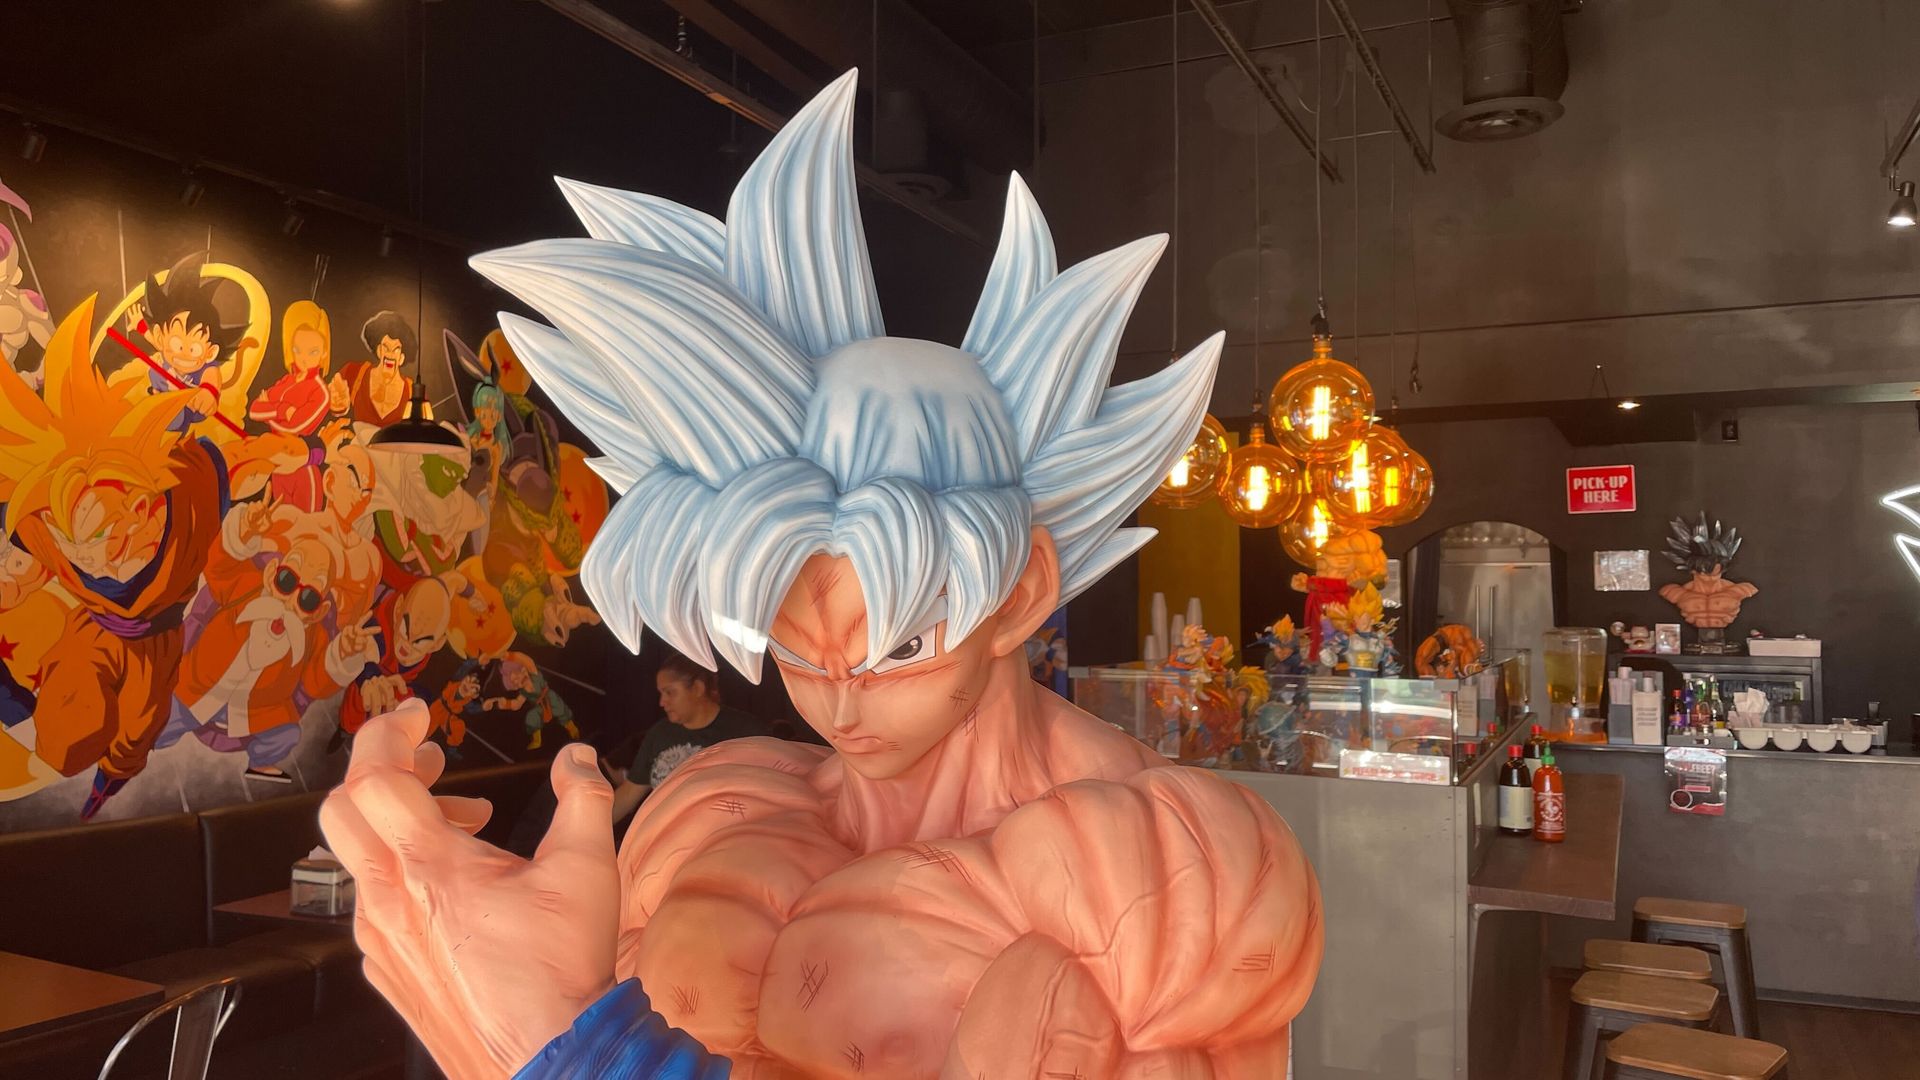 A life-sized statue of the "Dragon Super" character Goku at the Super Banh Mi eatery in Norcross.